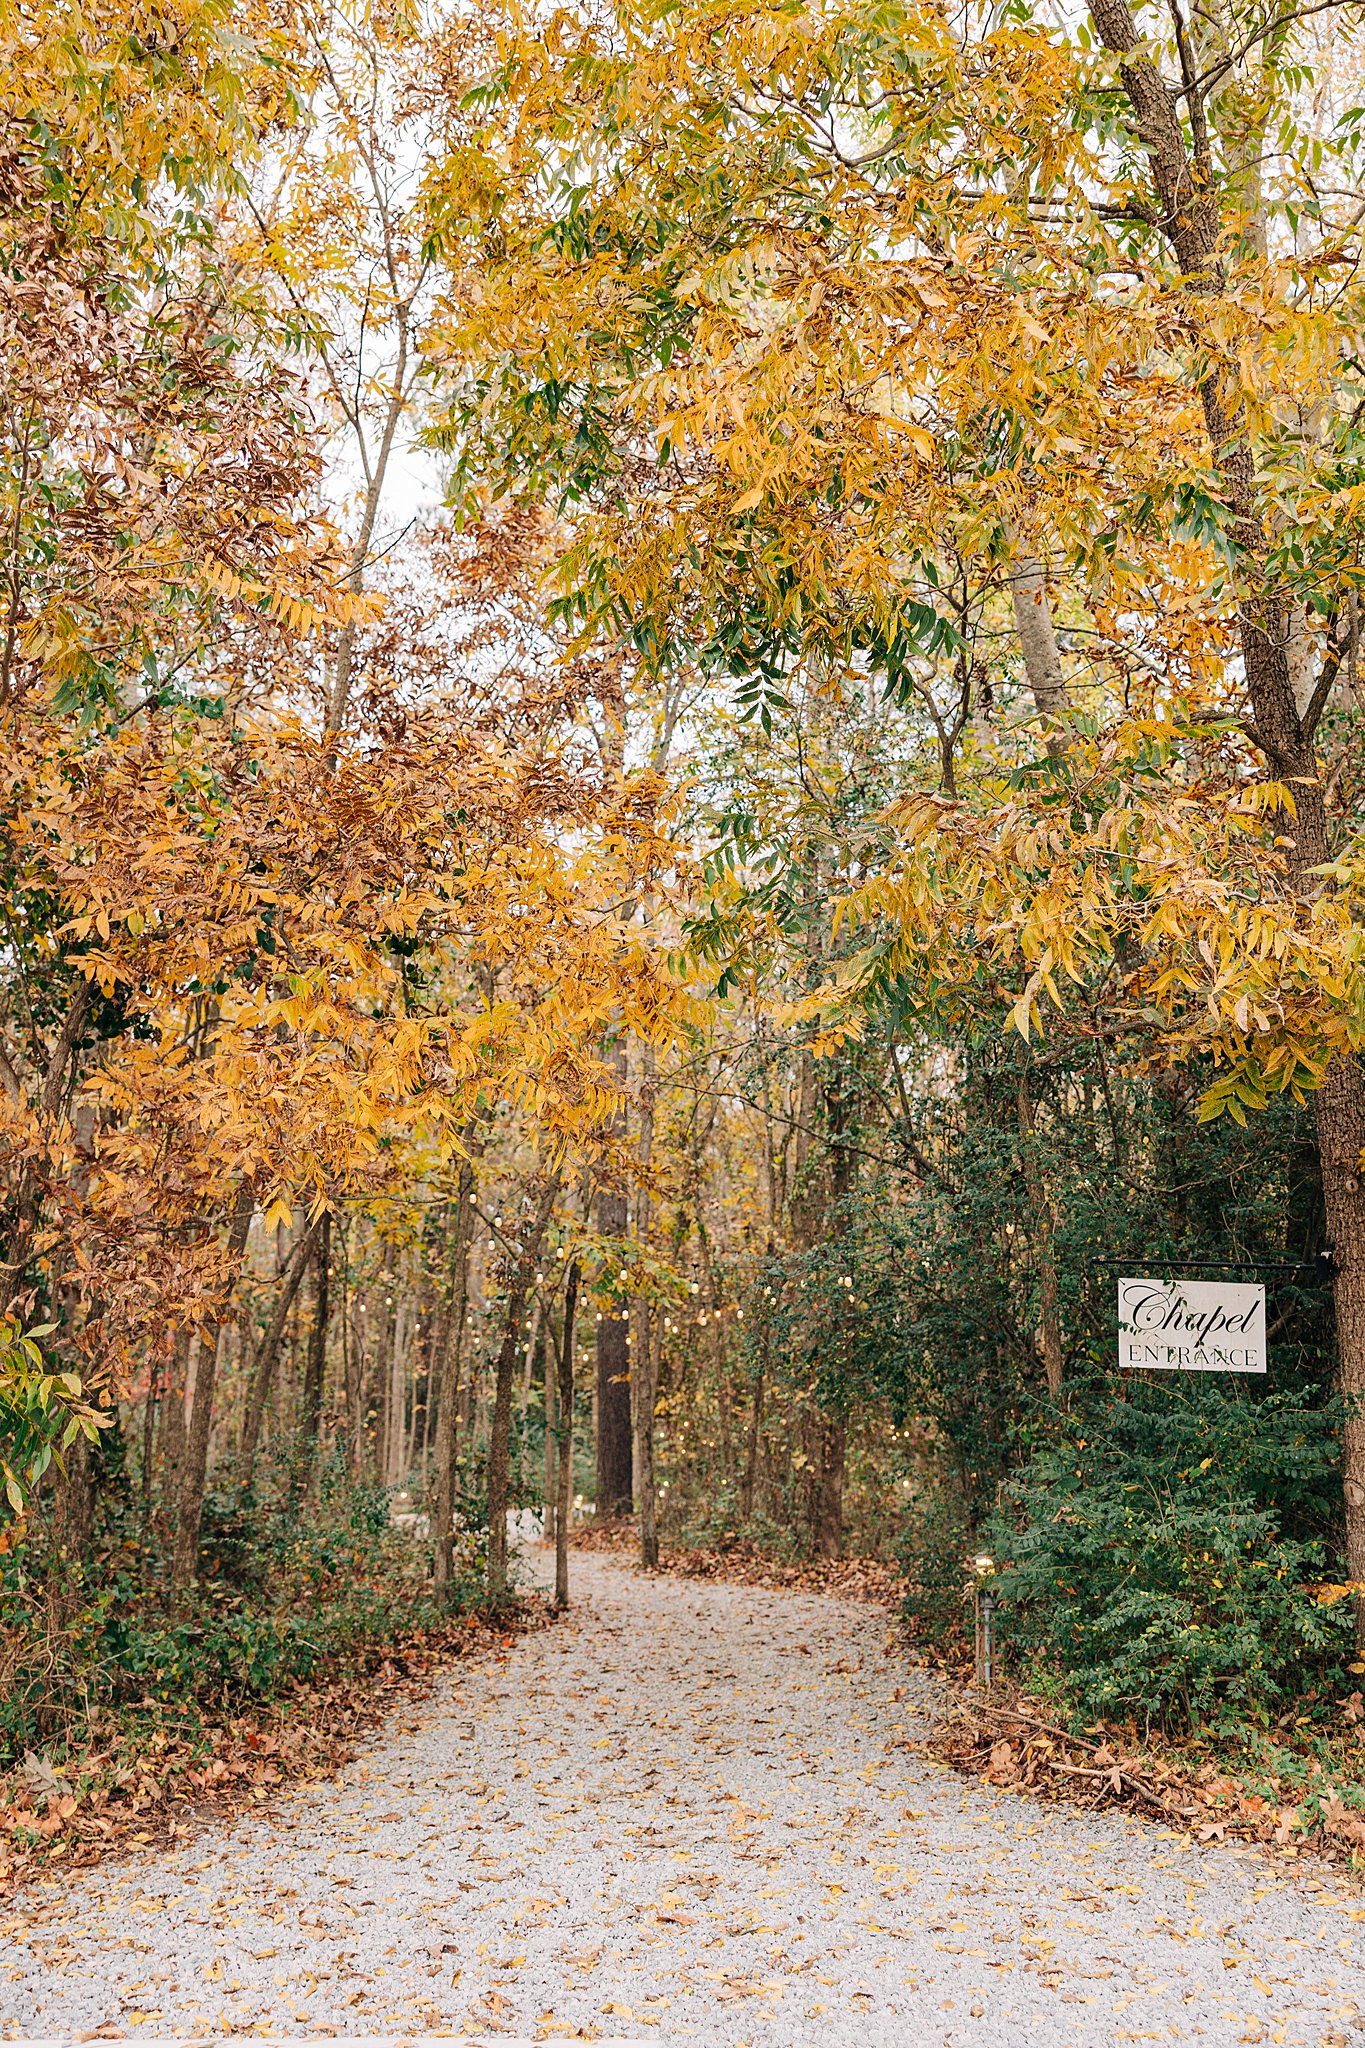 Details of the gravel path through a fall colored forest to the wedding chapel